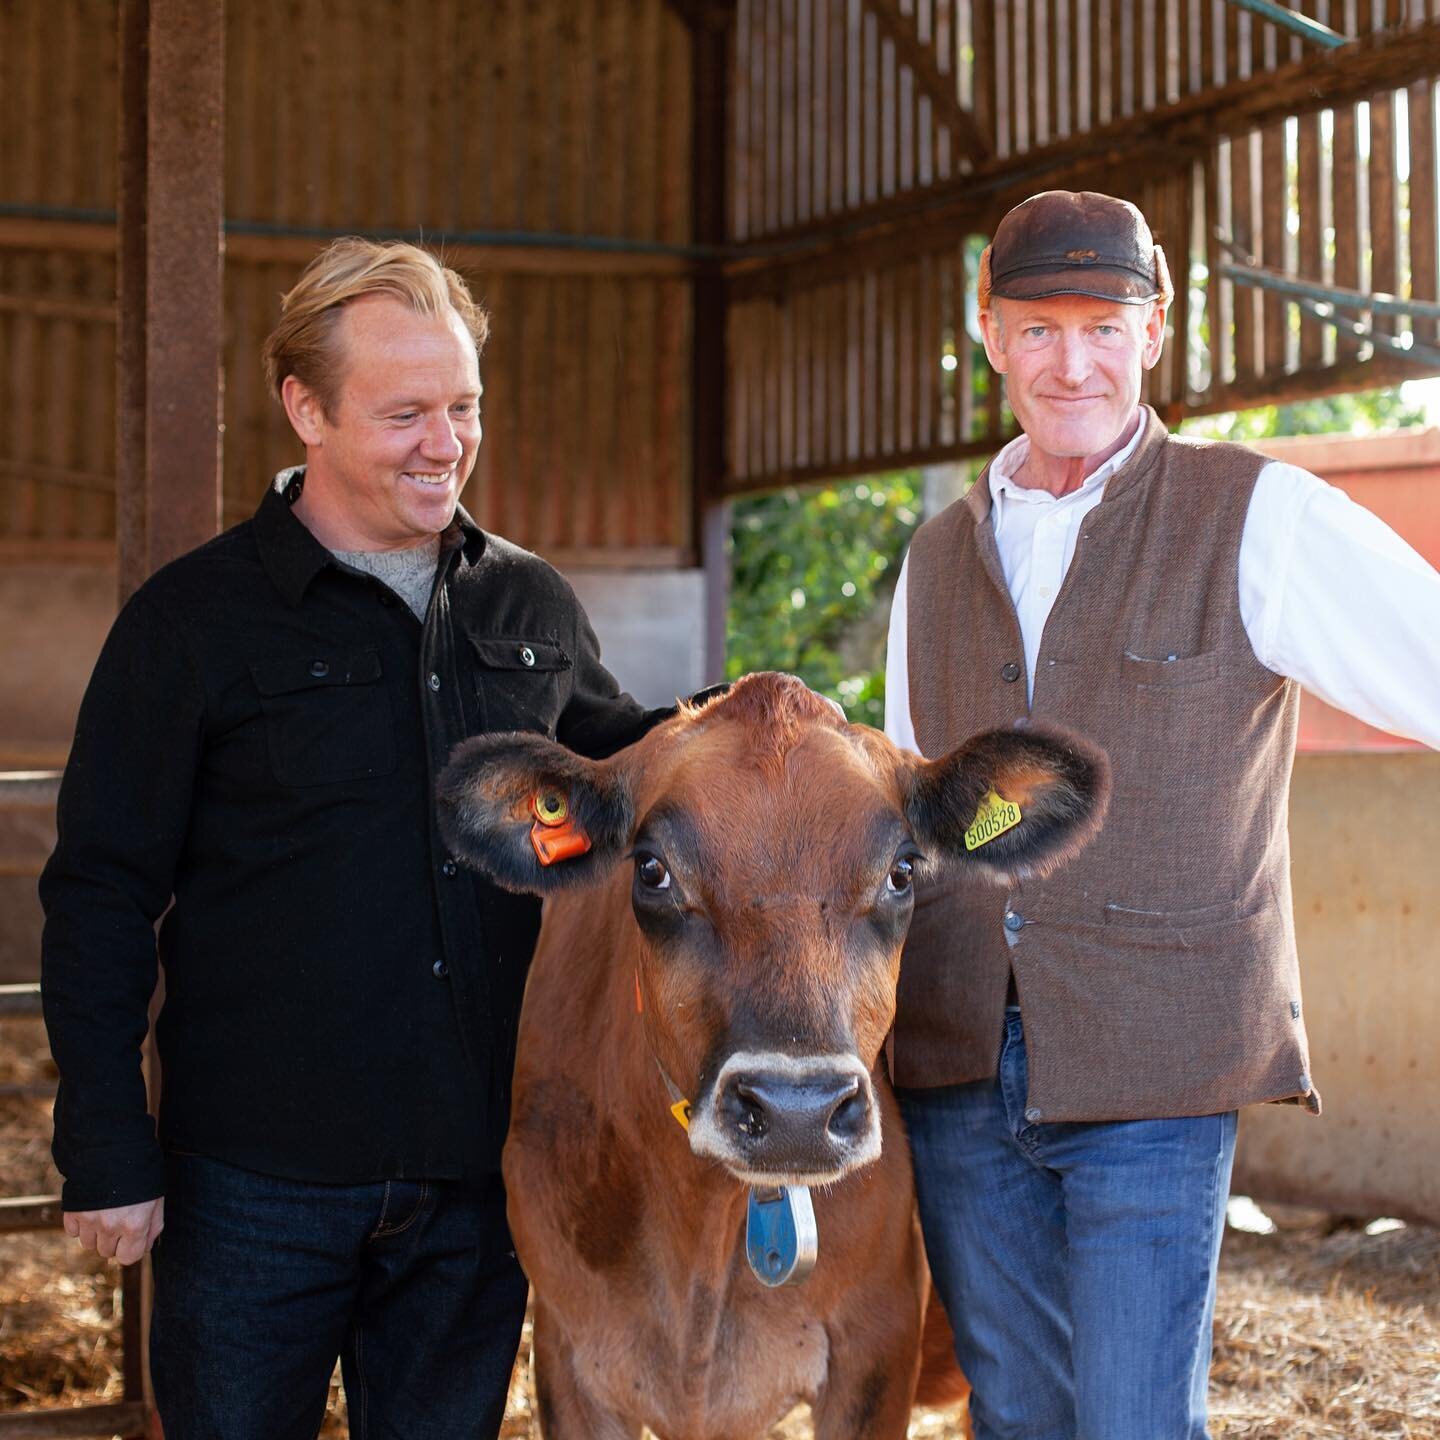 Yesterday I met David Leng and India from @blancpignondairyfarm . They produce an ever growing range of dairy products as well as pure Jersey cow meat. Usually the Jersey beef sold over here is an Angus cross, so I can&rsquo;t wait to taste their pur